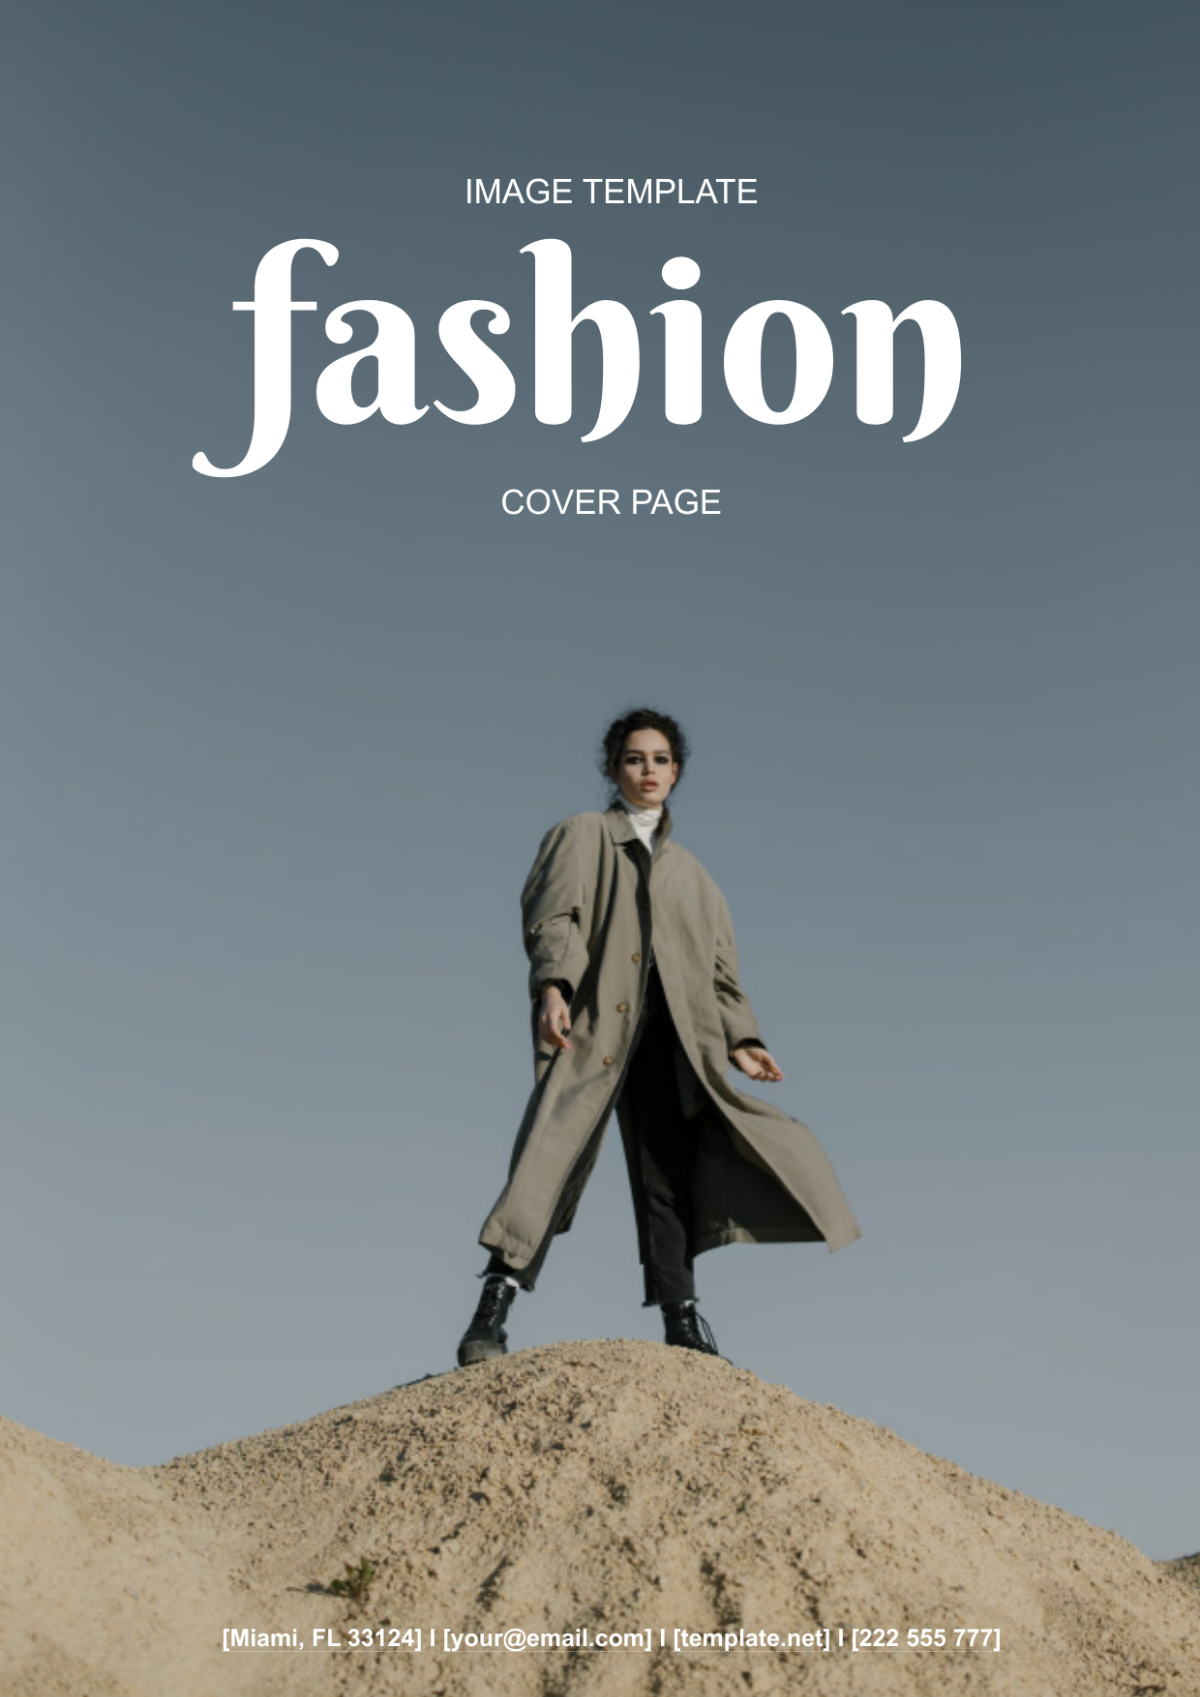 Fashion Cover Page Image